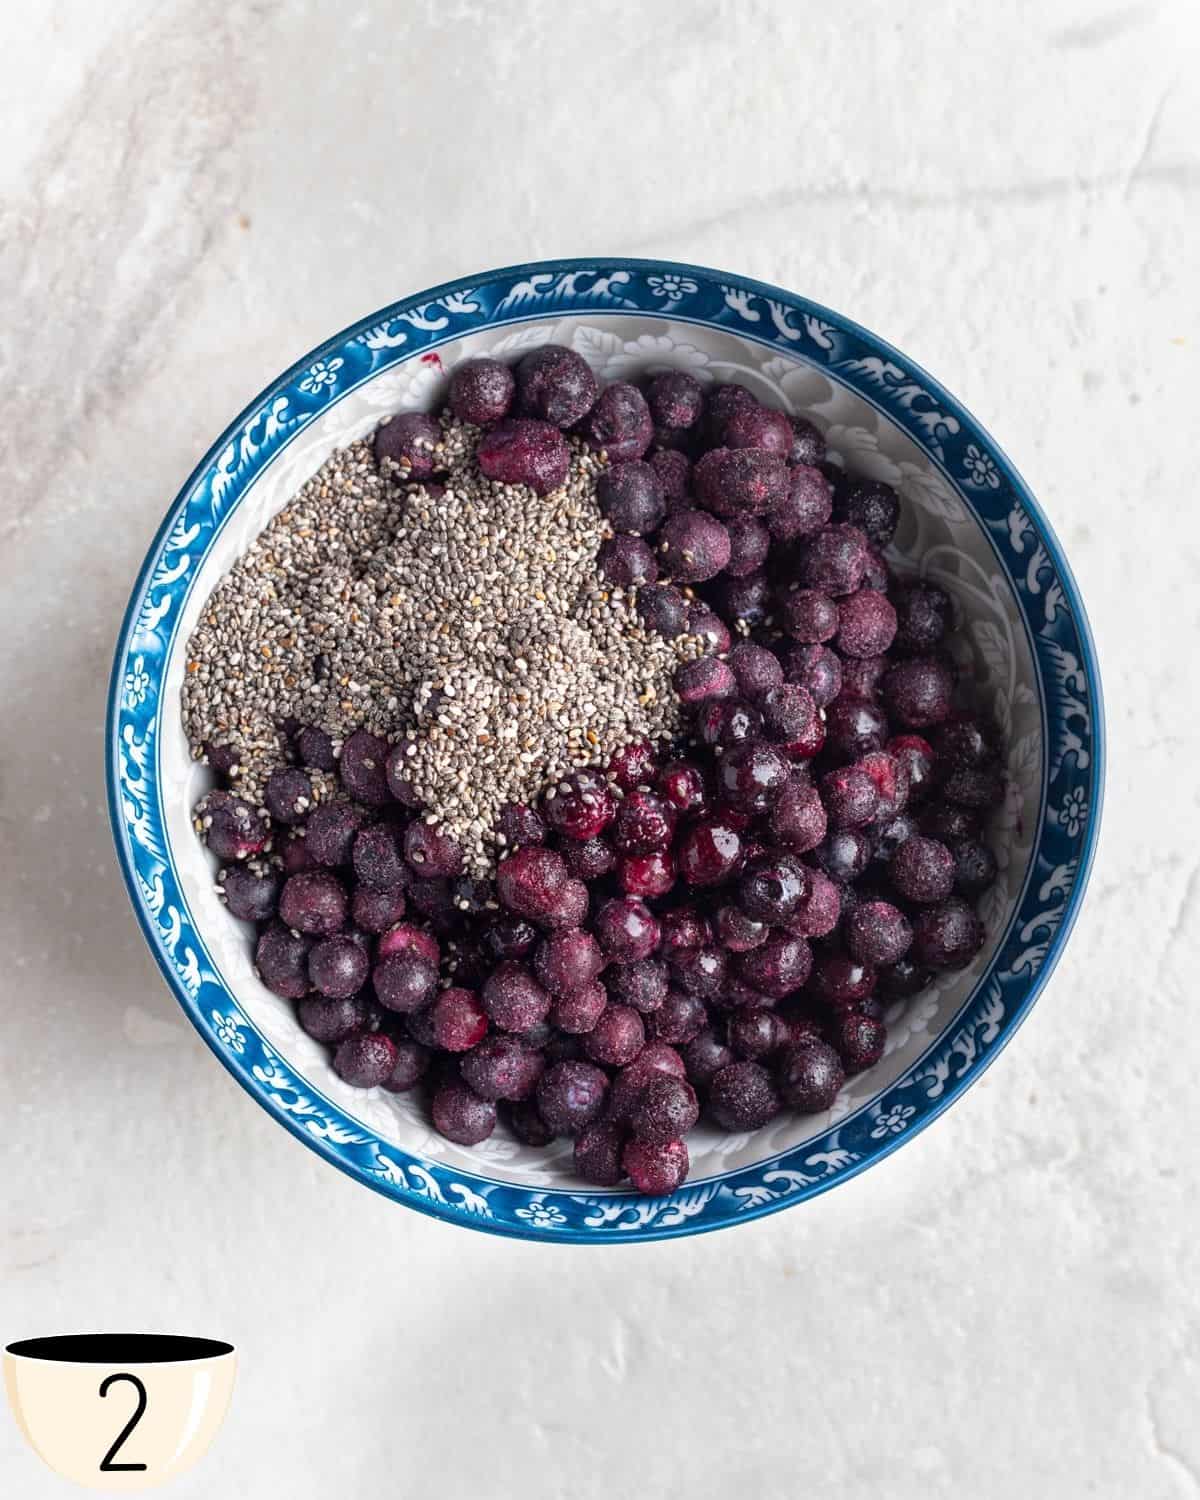 A bowl of frozen blueberries topped with chia seeds, in preparation to be microwaved to make a compote layer for overnight oats.